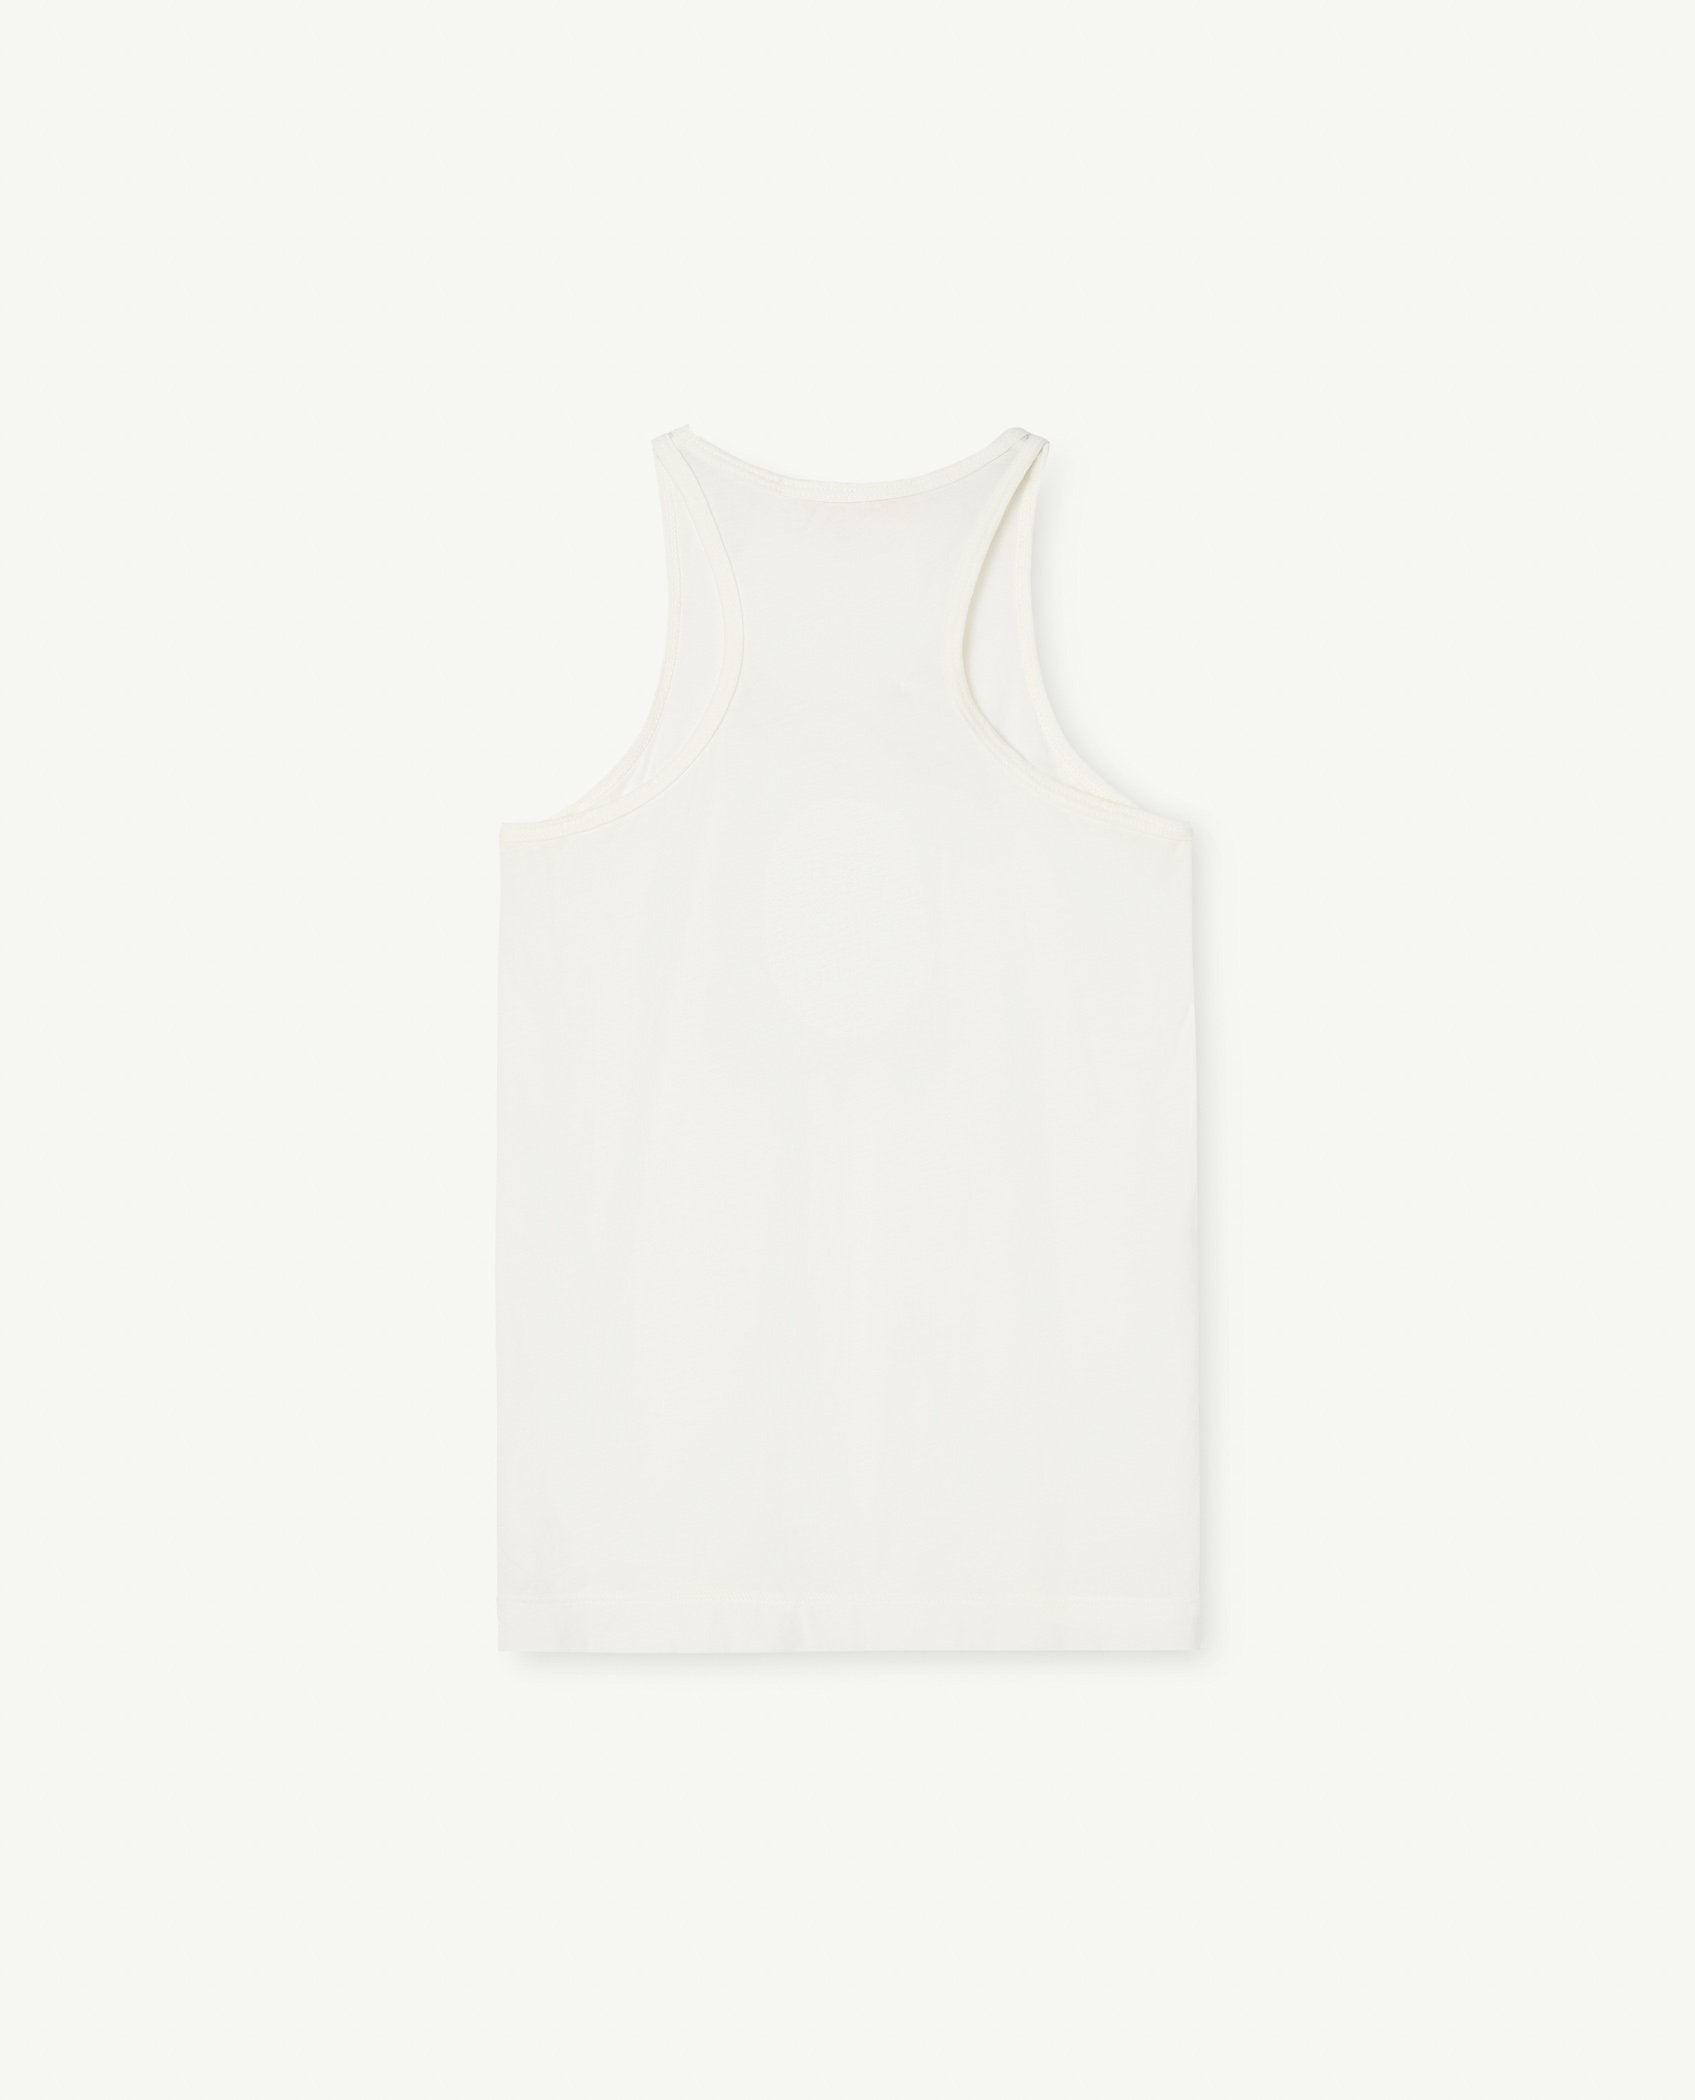 White Frog Tank Top PRODUCT BACK